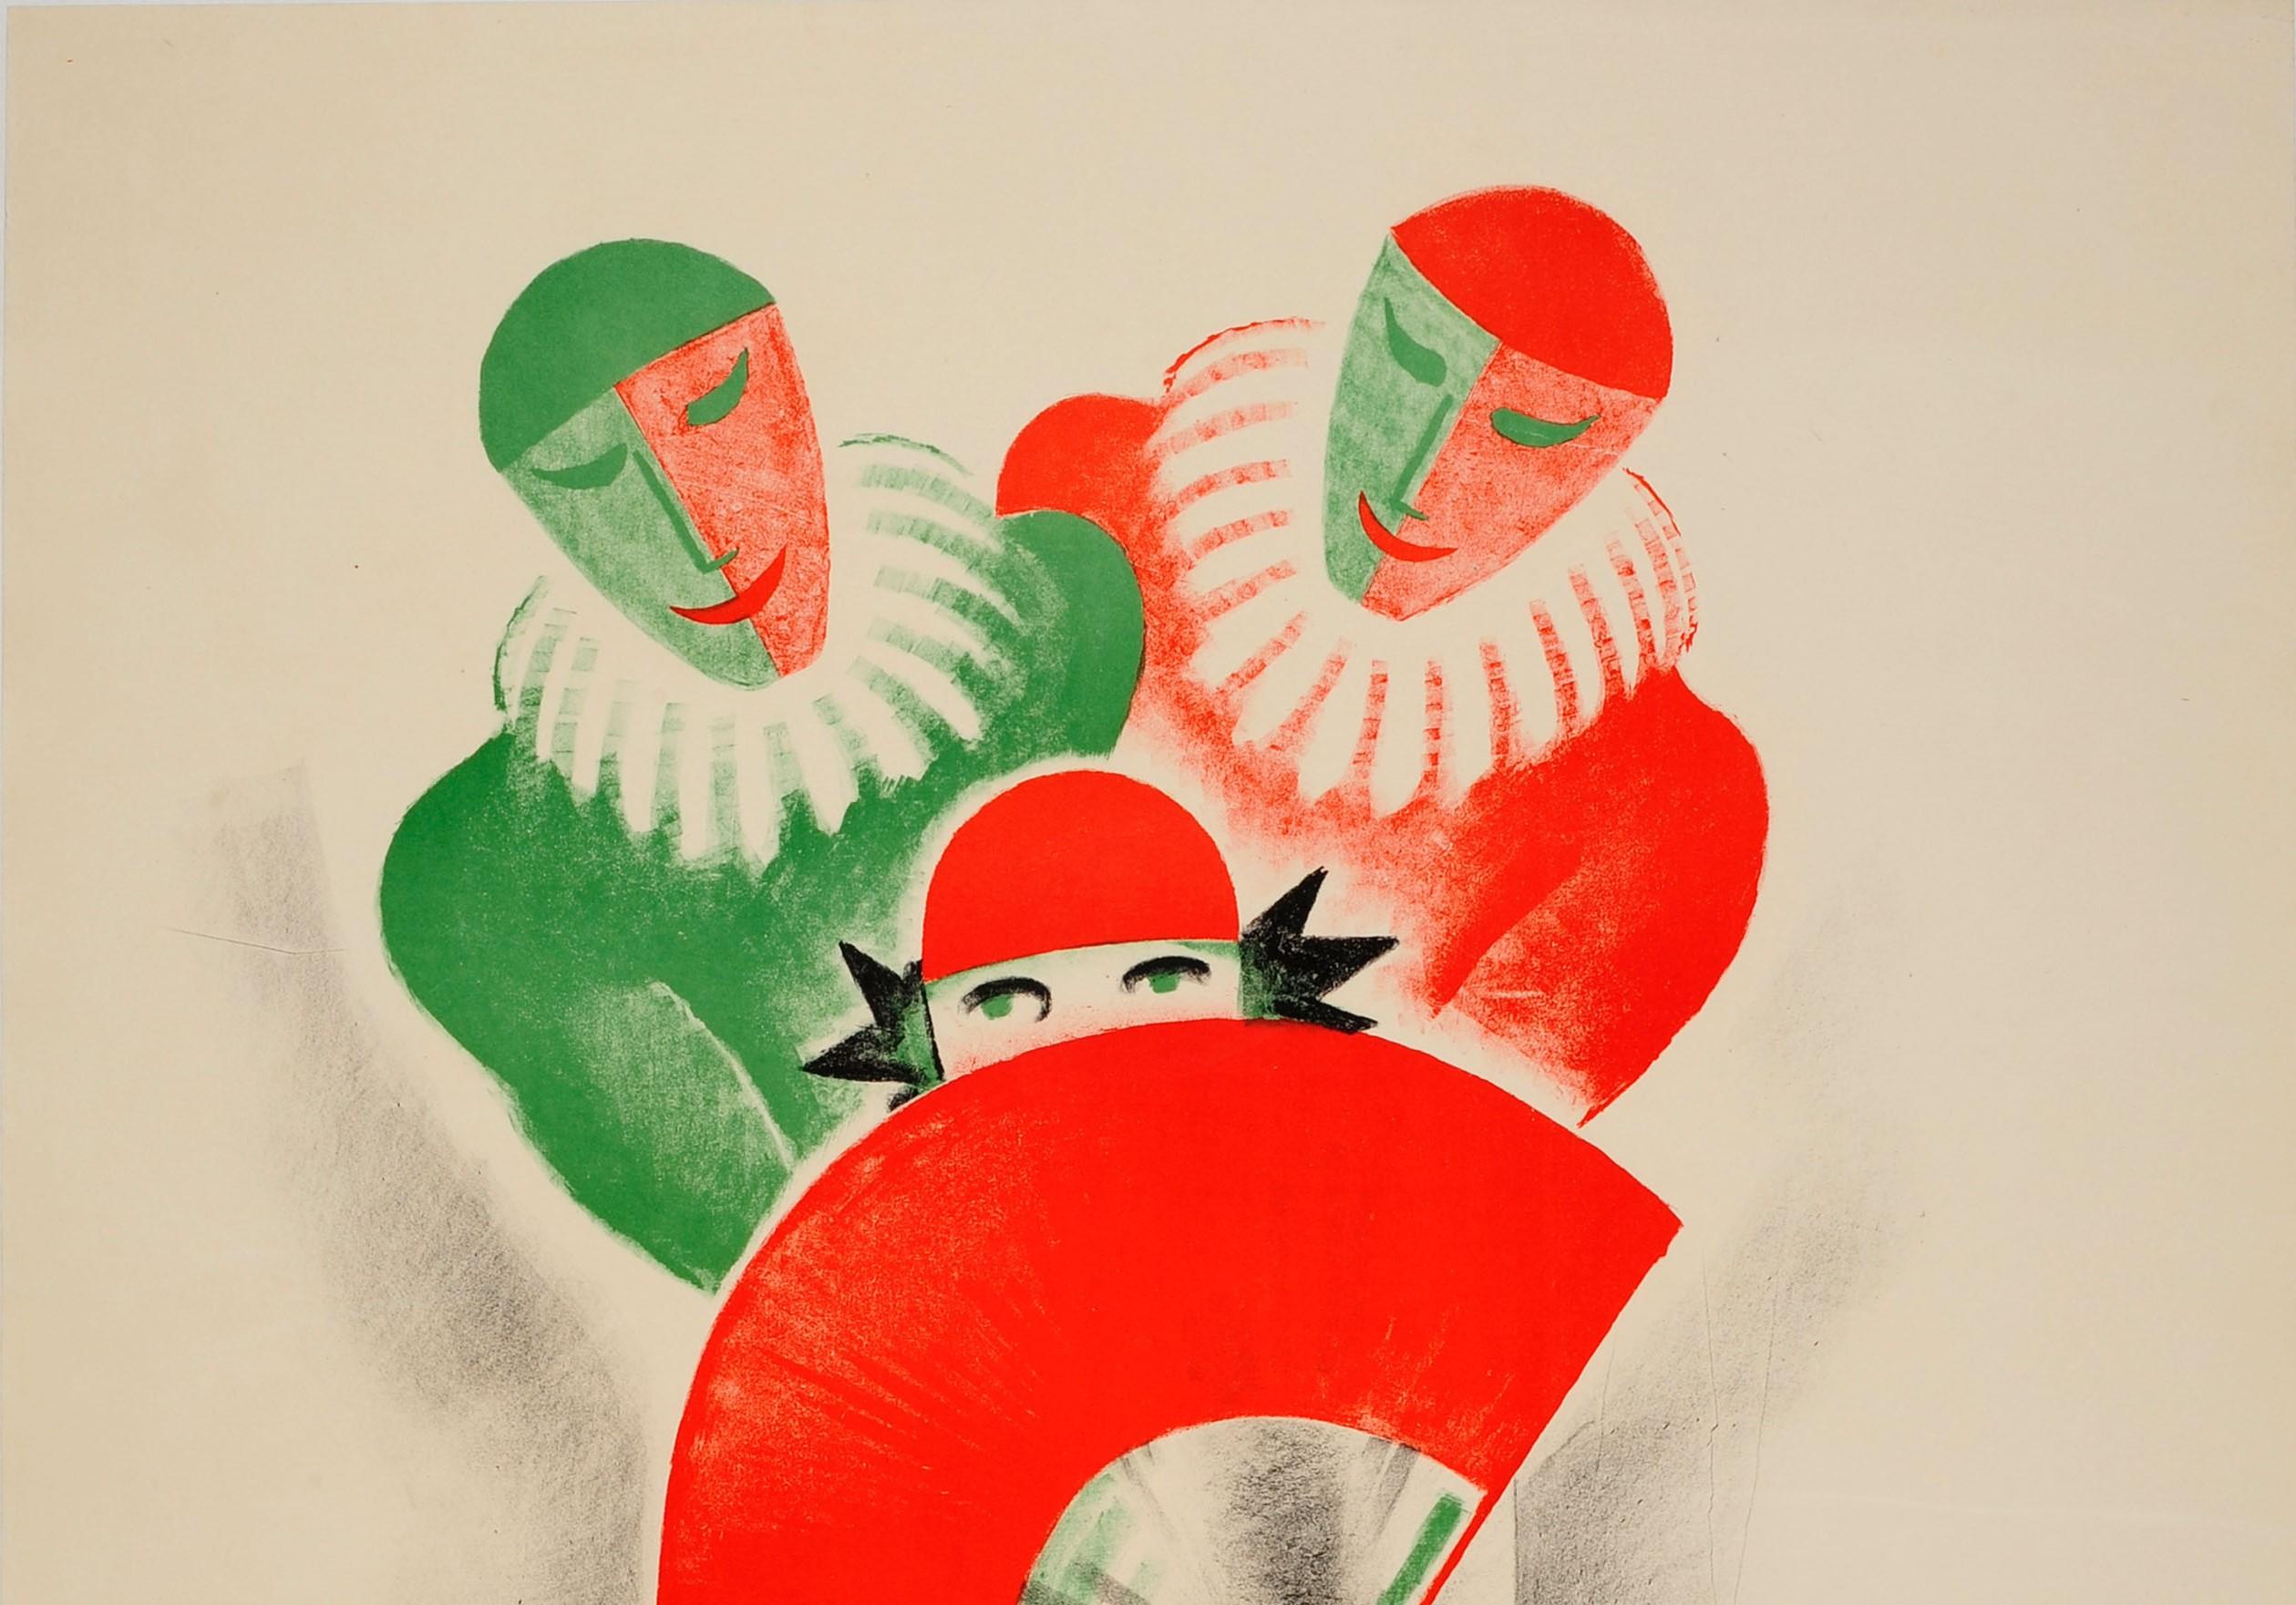 Original vintage advertising poster for the Quodlibet Masken-Ball / Masquerade Masked Ball at the Basel lent carnival in Switzerland held at the Casino-Basel on the evening of Monday 6 March. Great illustration in shades of green and red of a lady